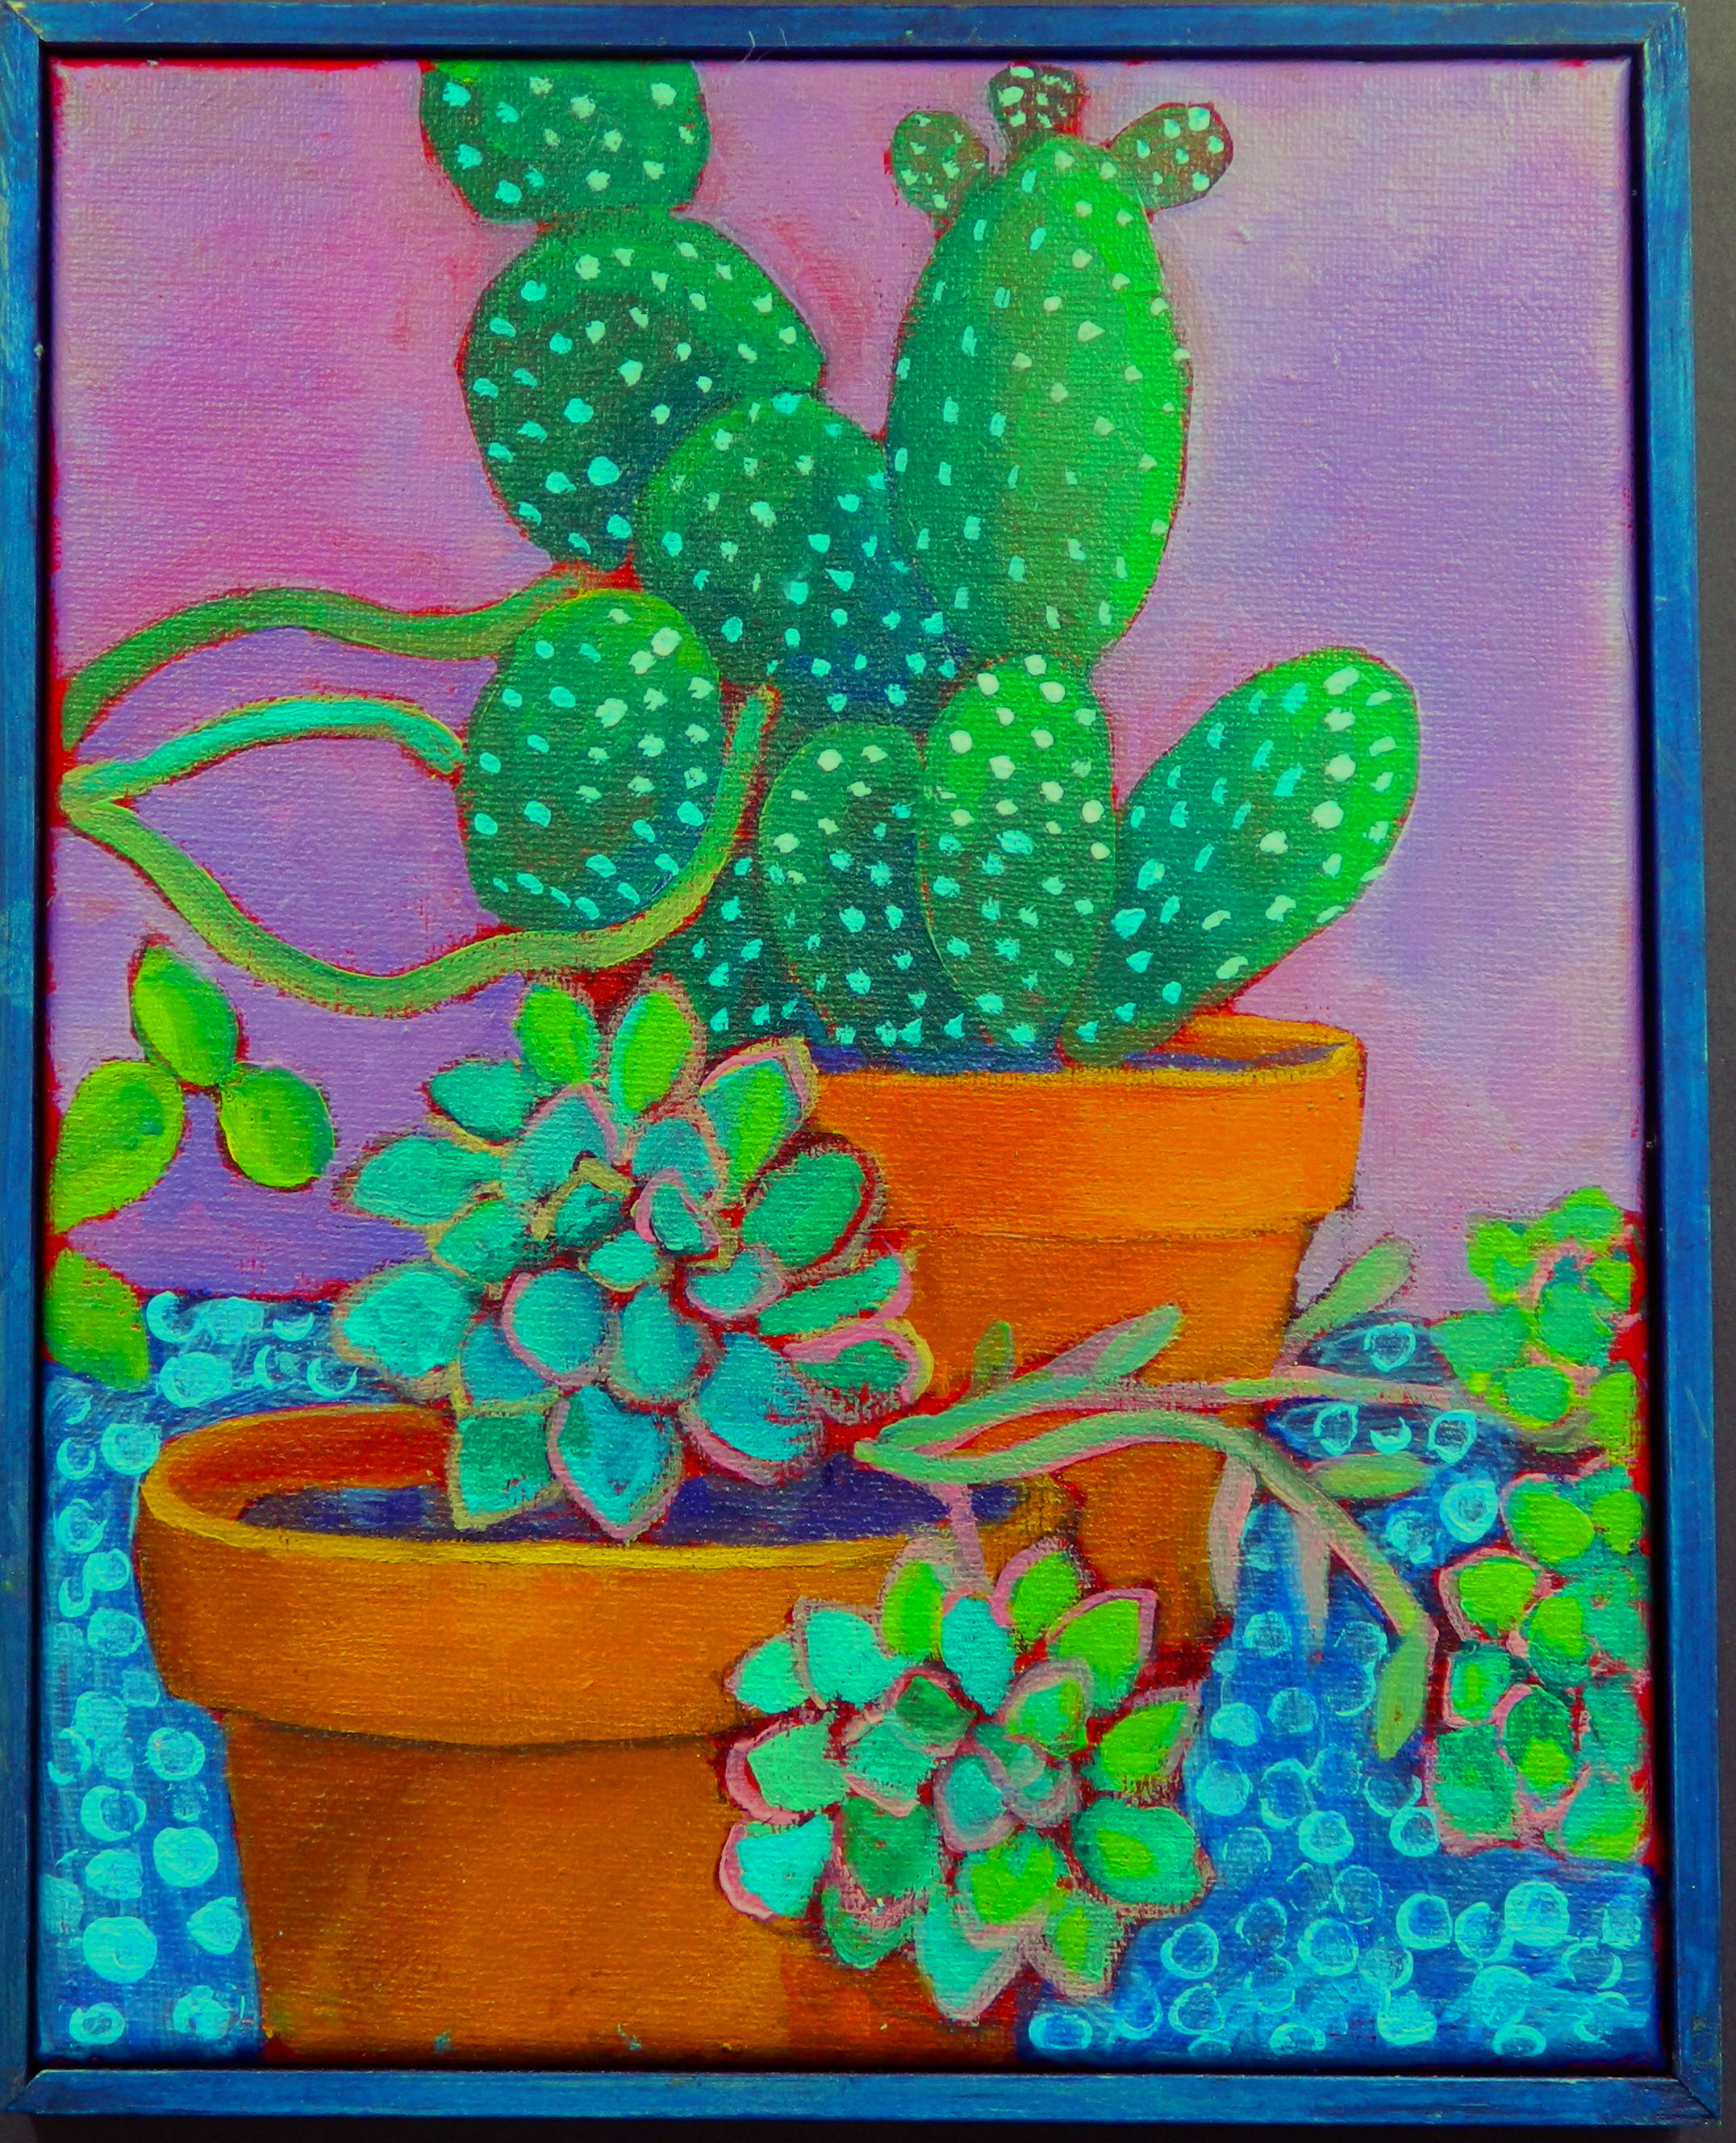 Afternoon cactus